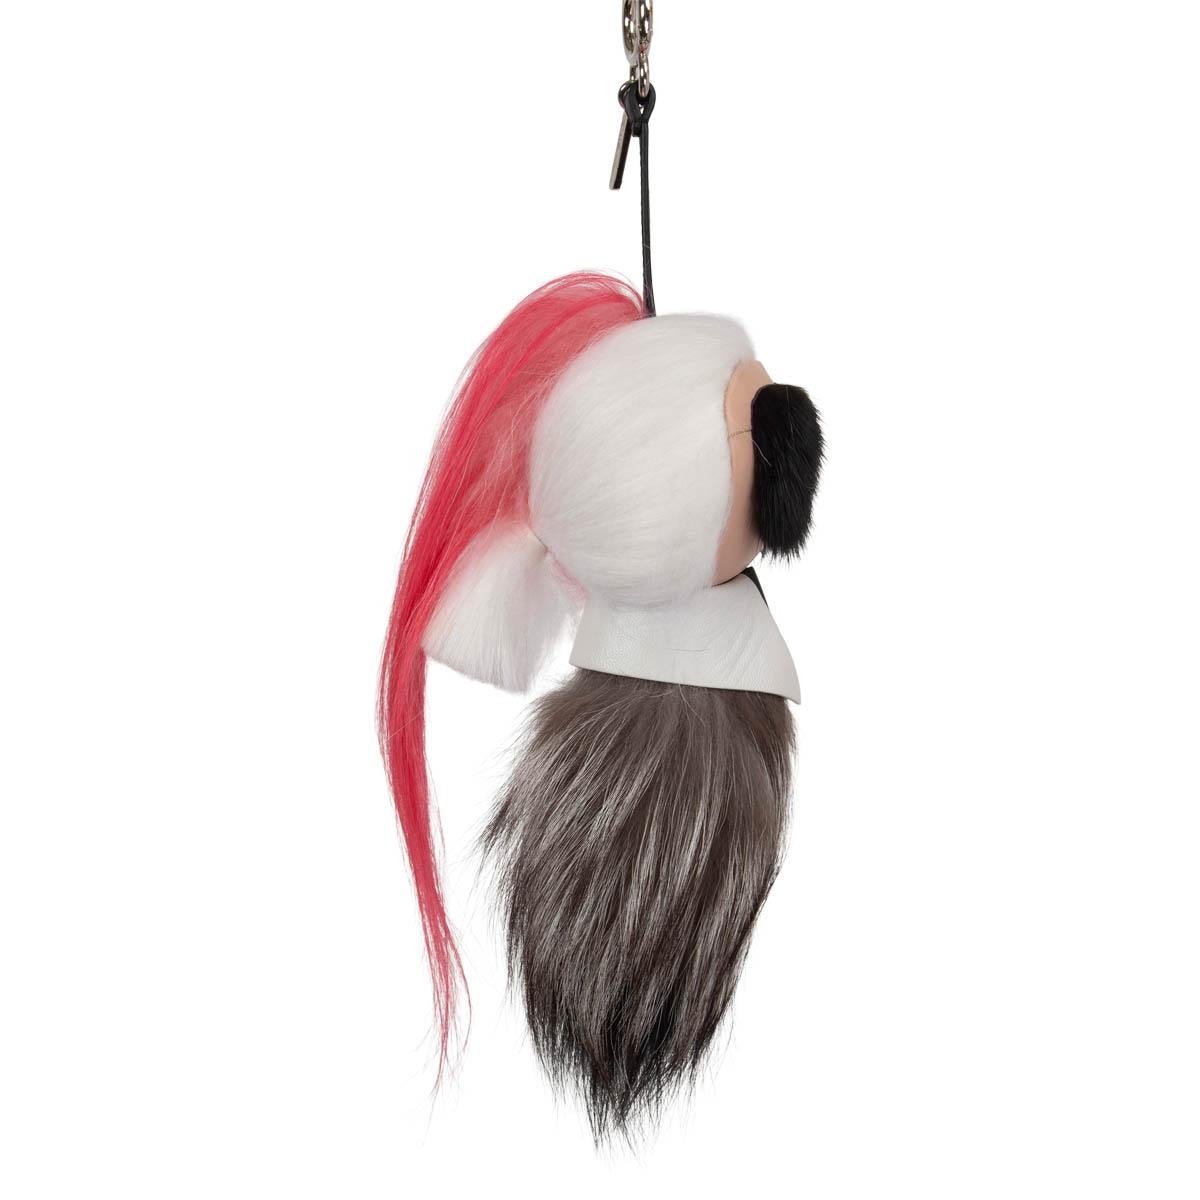 100% authentic Fendi Karlito Karl Lagerfeld bag charm and or keychain in black mink fur, grey and black fox fur and white and black leather featuring white and pink hair. Has been carried and is in excellent condition.

Measurements
Width	12cm